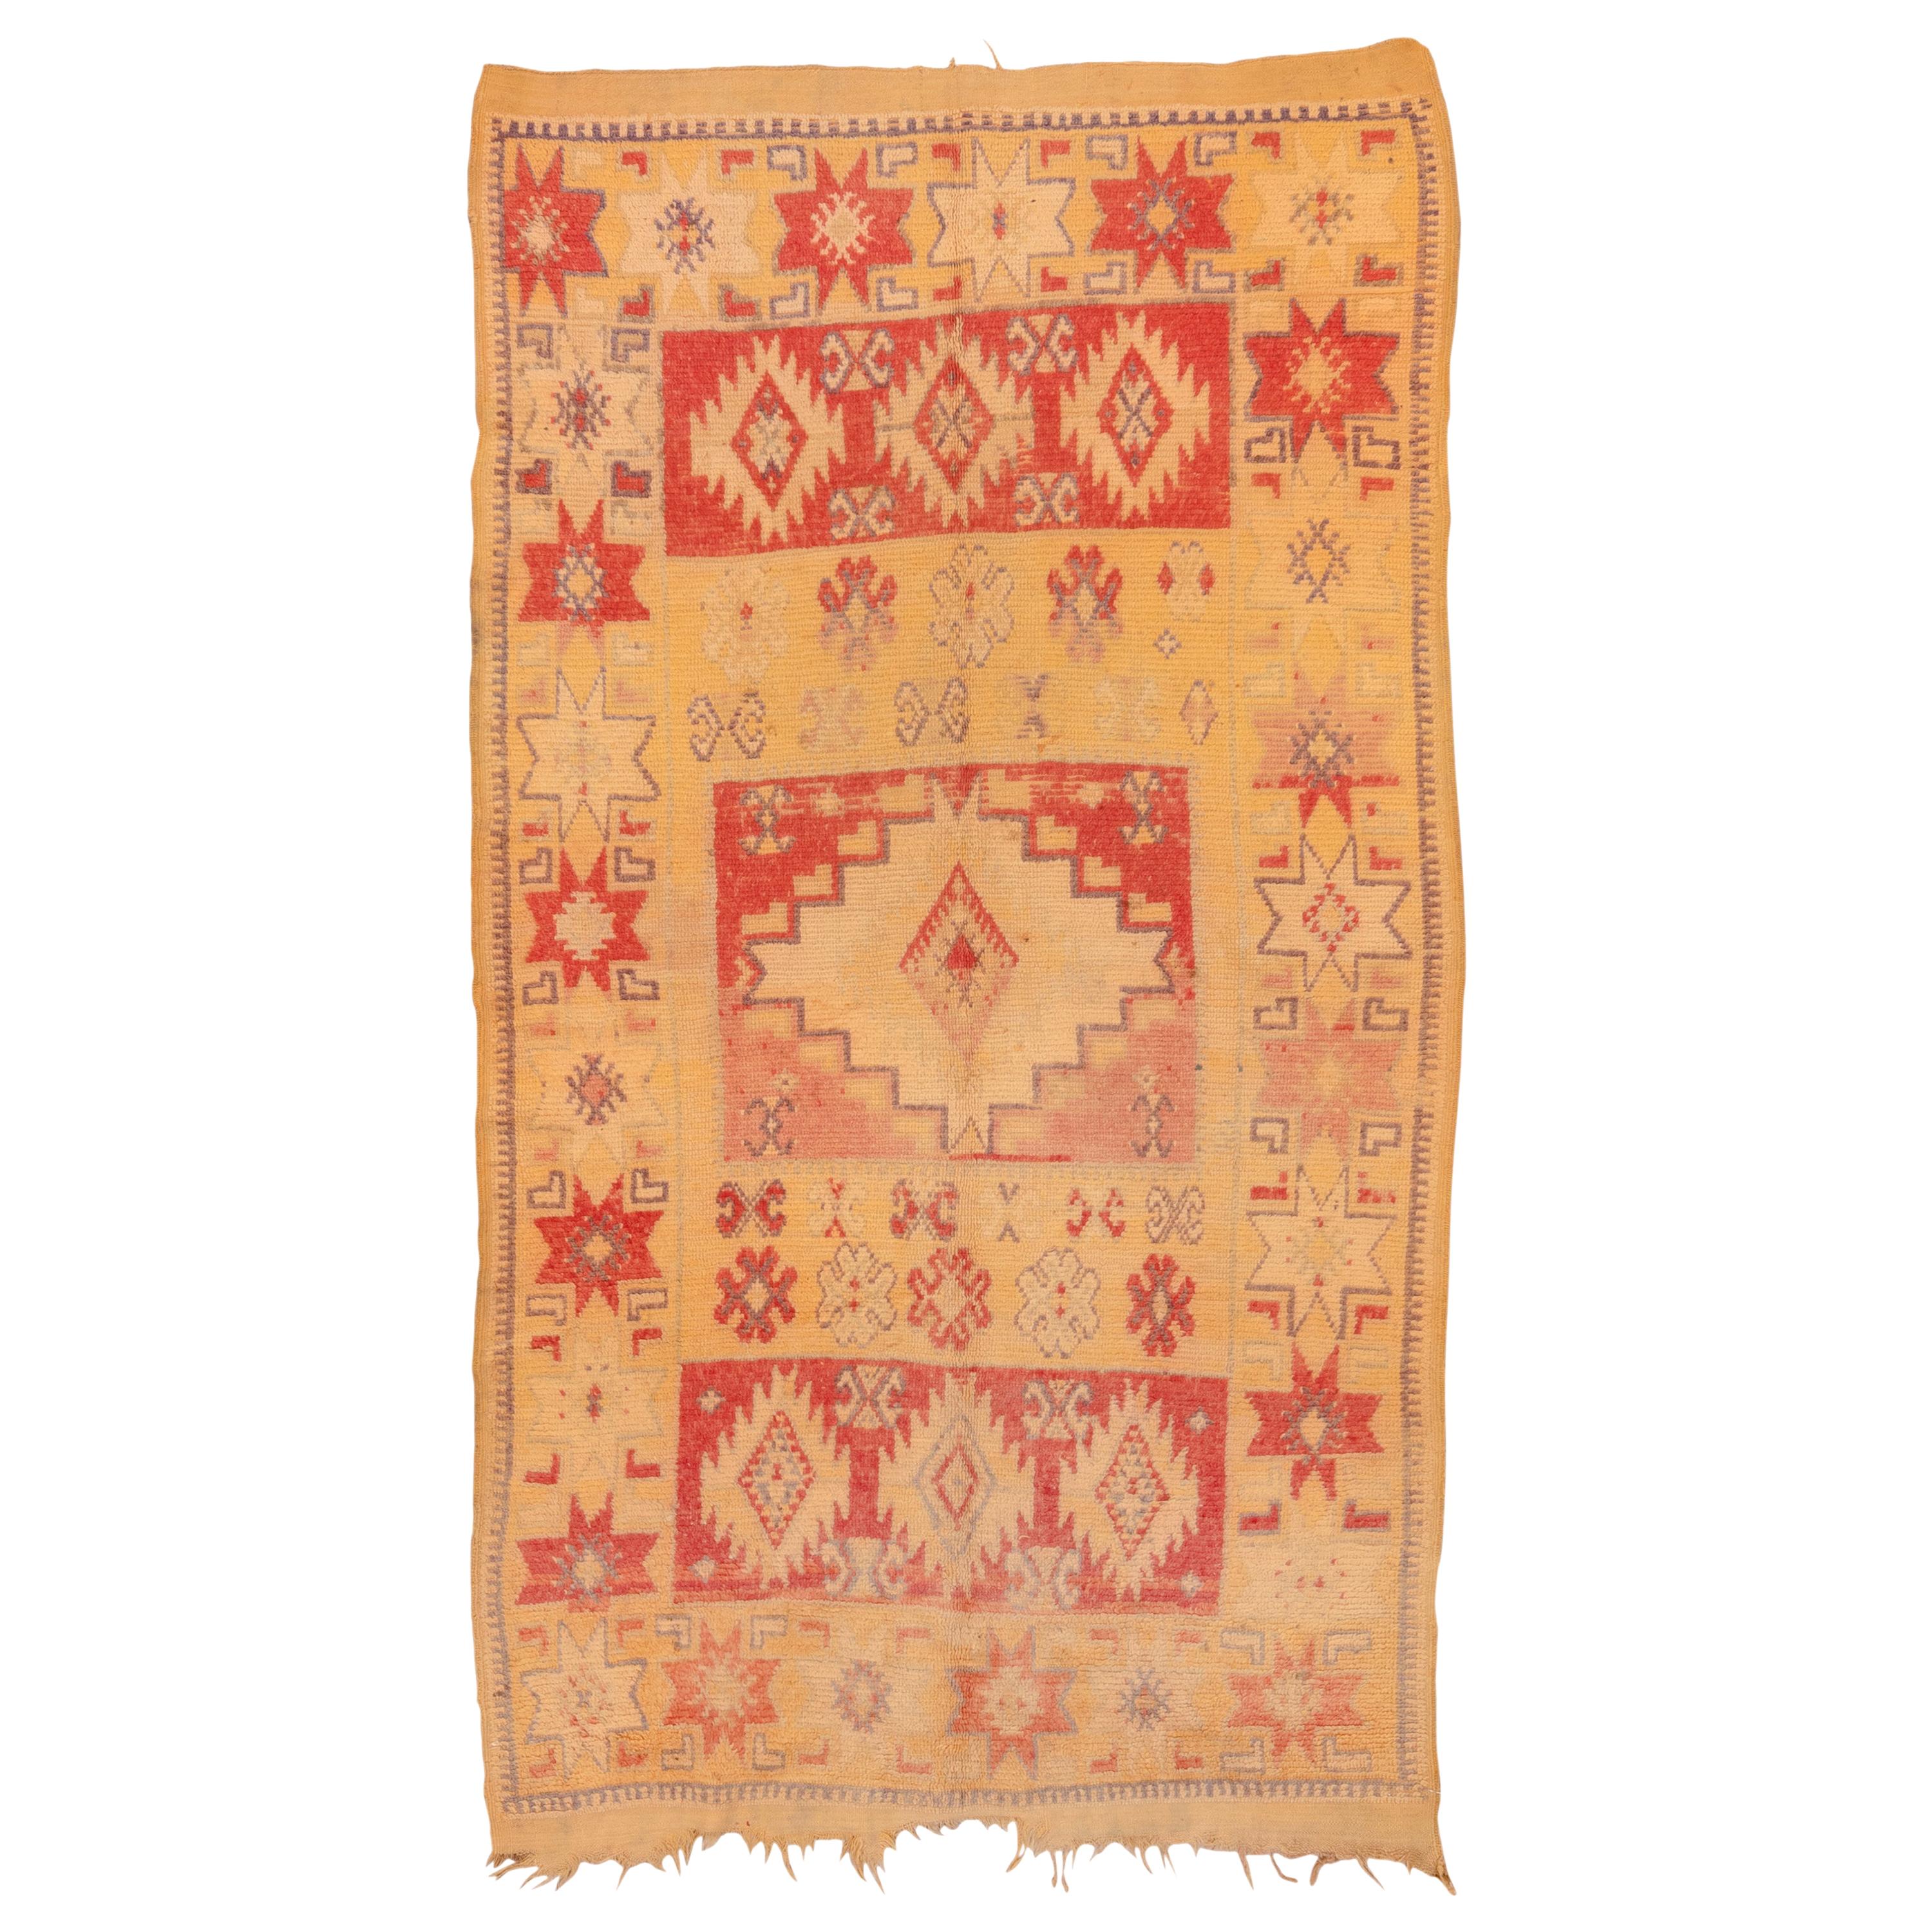 Vintage Moroccan Rug, Yellow and Red Field, Bright Colors